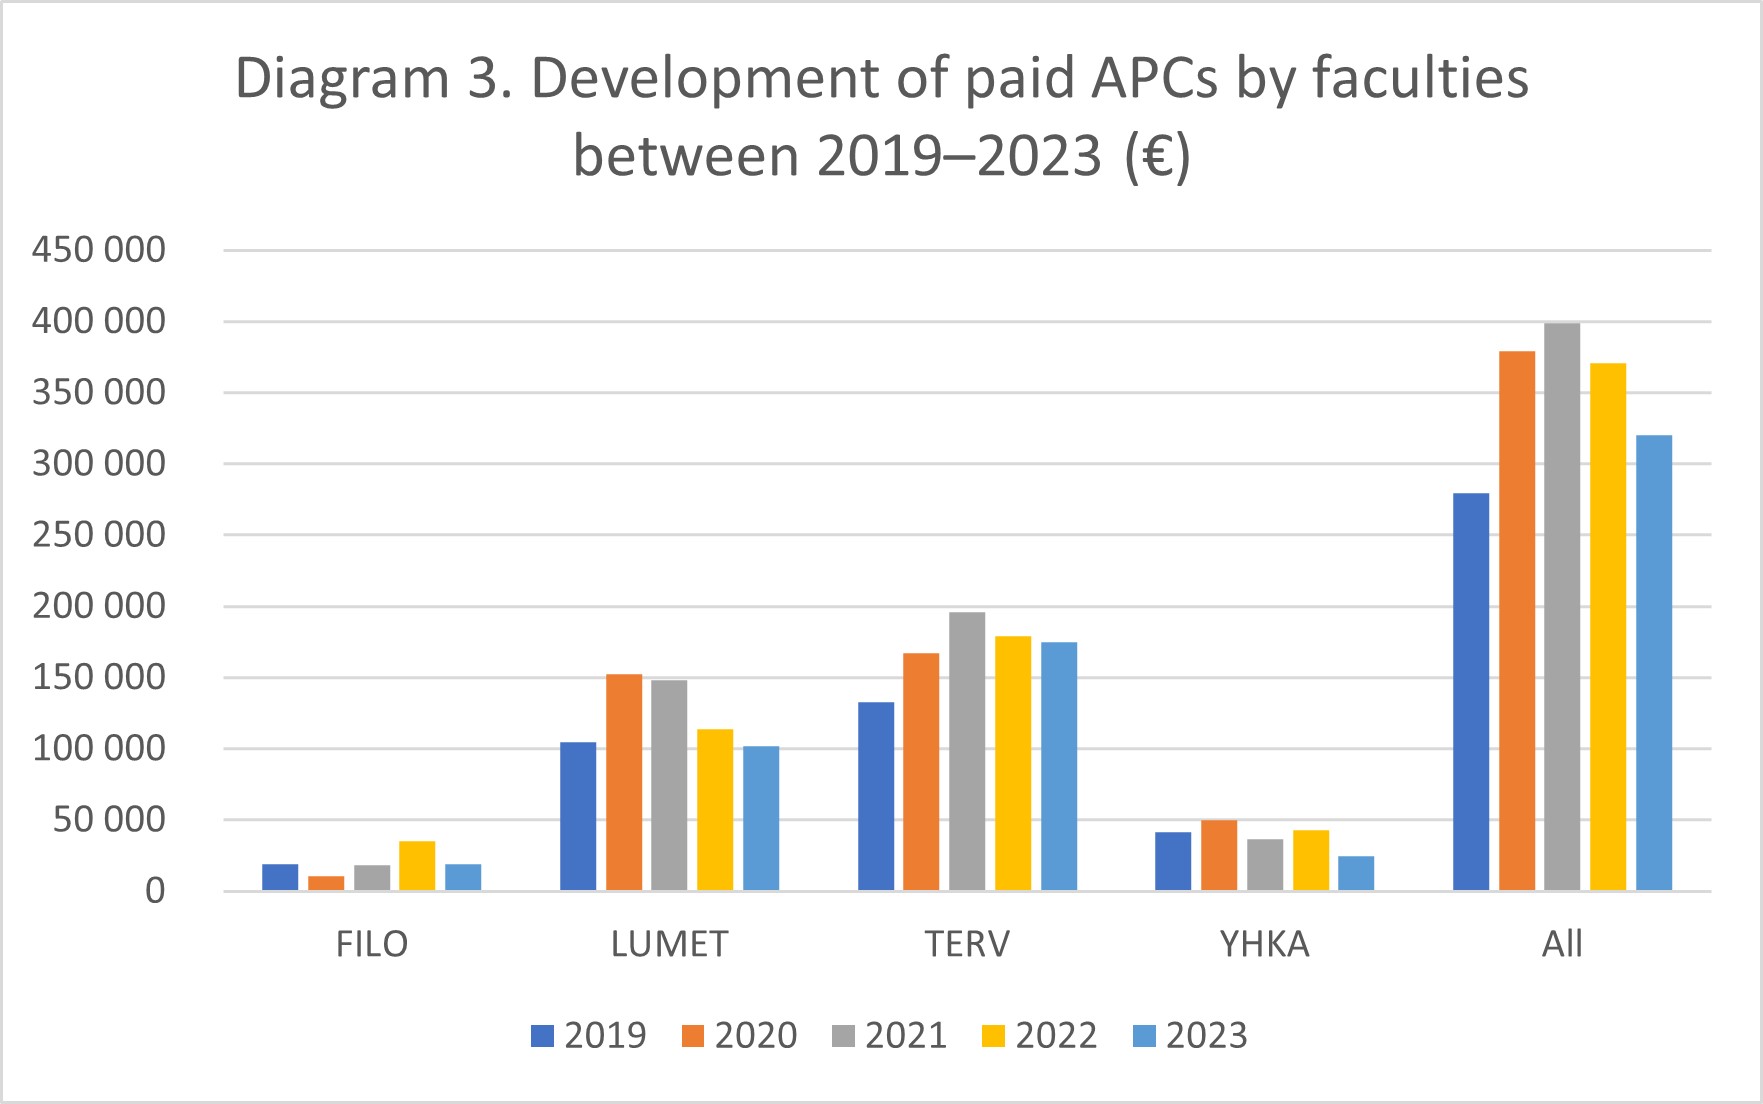 Diagram: philosophical faculty 18797 euros in year 2019, 10175 euros in year 2020, 18350 euros in year 2021, 35085 euros in year 2022, 19078 euros in year 2023, faculty of science, forestry and technology 104241 euros in 2019 152342 euros in year 2020, 148164 euros in year 2021, 113428 euros in year 2022, 101784 euros in year 2023, faculty of health sciences 132442 euros in year 2019, 166925 euros in year 2020, 195790 euros in year 2021, 179208 euros in year 2022, 174591 euros in year 2023, faculty of social sciences and business studies 41605 euros in year 2019, 49943 euros in year 2020, 36471 euros in year 2021, 42724 euros in year 2022, 24512 euros in year 2023, all 279083 euros in year 2019, 379385 euros in year 2020, 398775 euros in year 2021, 370444 euros in year 2022, 319965 euros in year 2023.